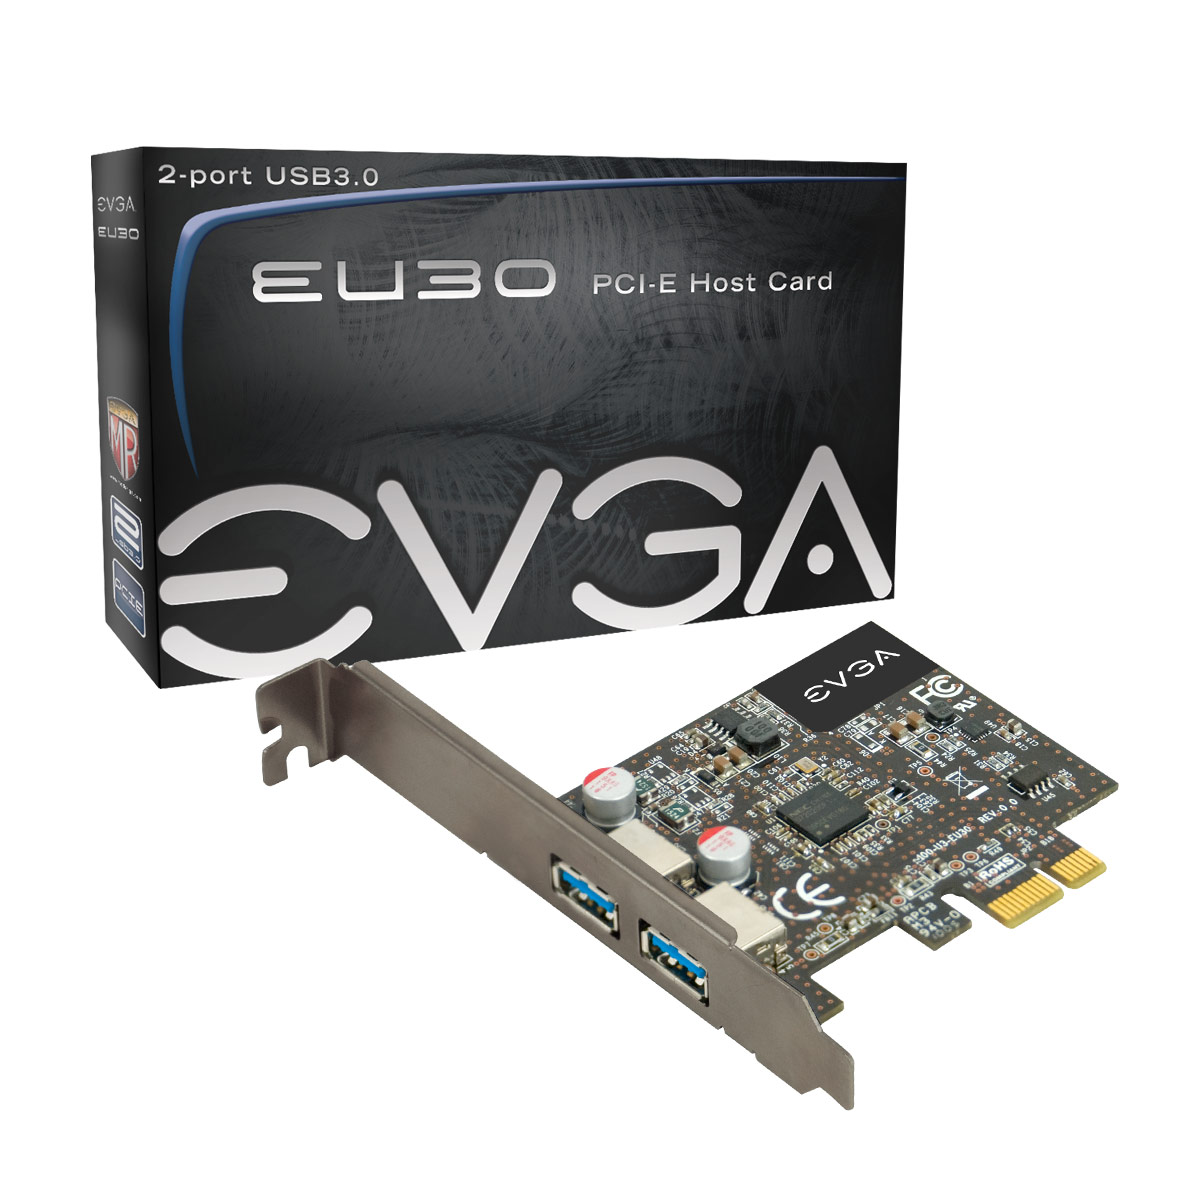 Media asset in full size related to 3dfxzone.it news item entitled as follows: EVGA realizza EU30, un controller USB 3.0 per bus PCI-Express | Image Name: news13273_1.jpg